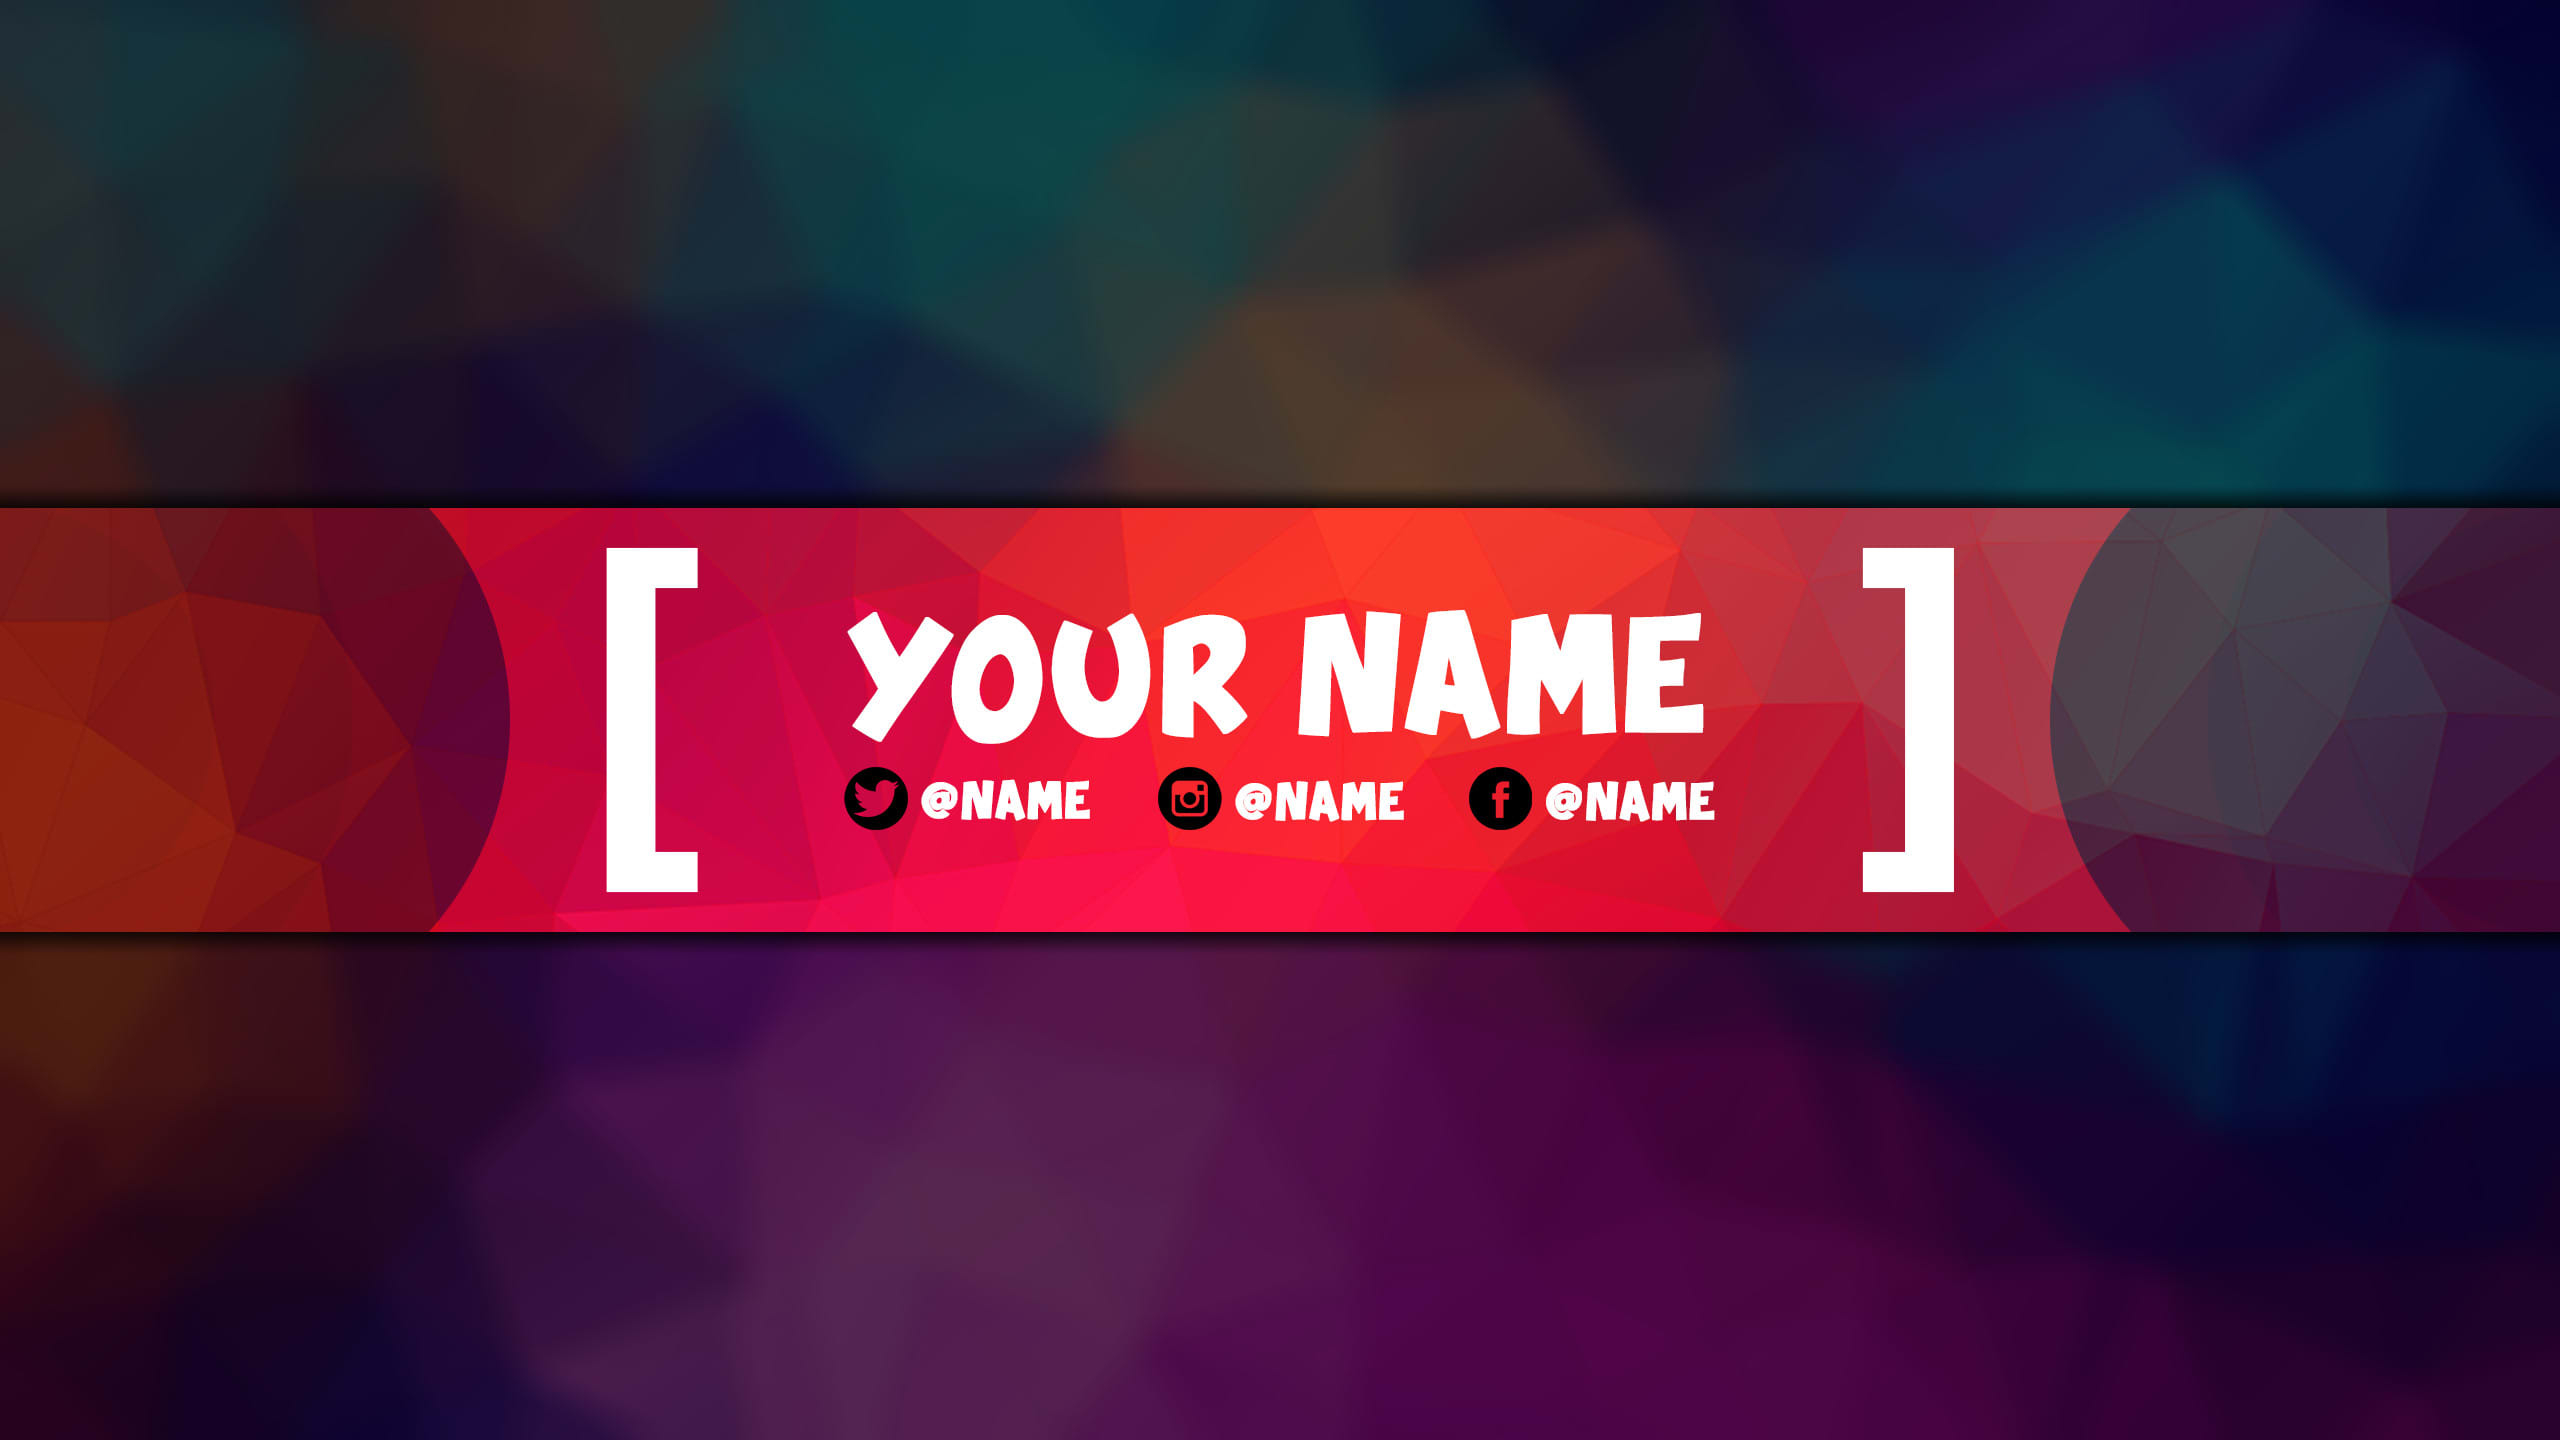 Youtube Banner Size 2018 - NEW FREE GFX - YOUTUBE BANNER TEMPLATE 2018